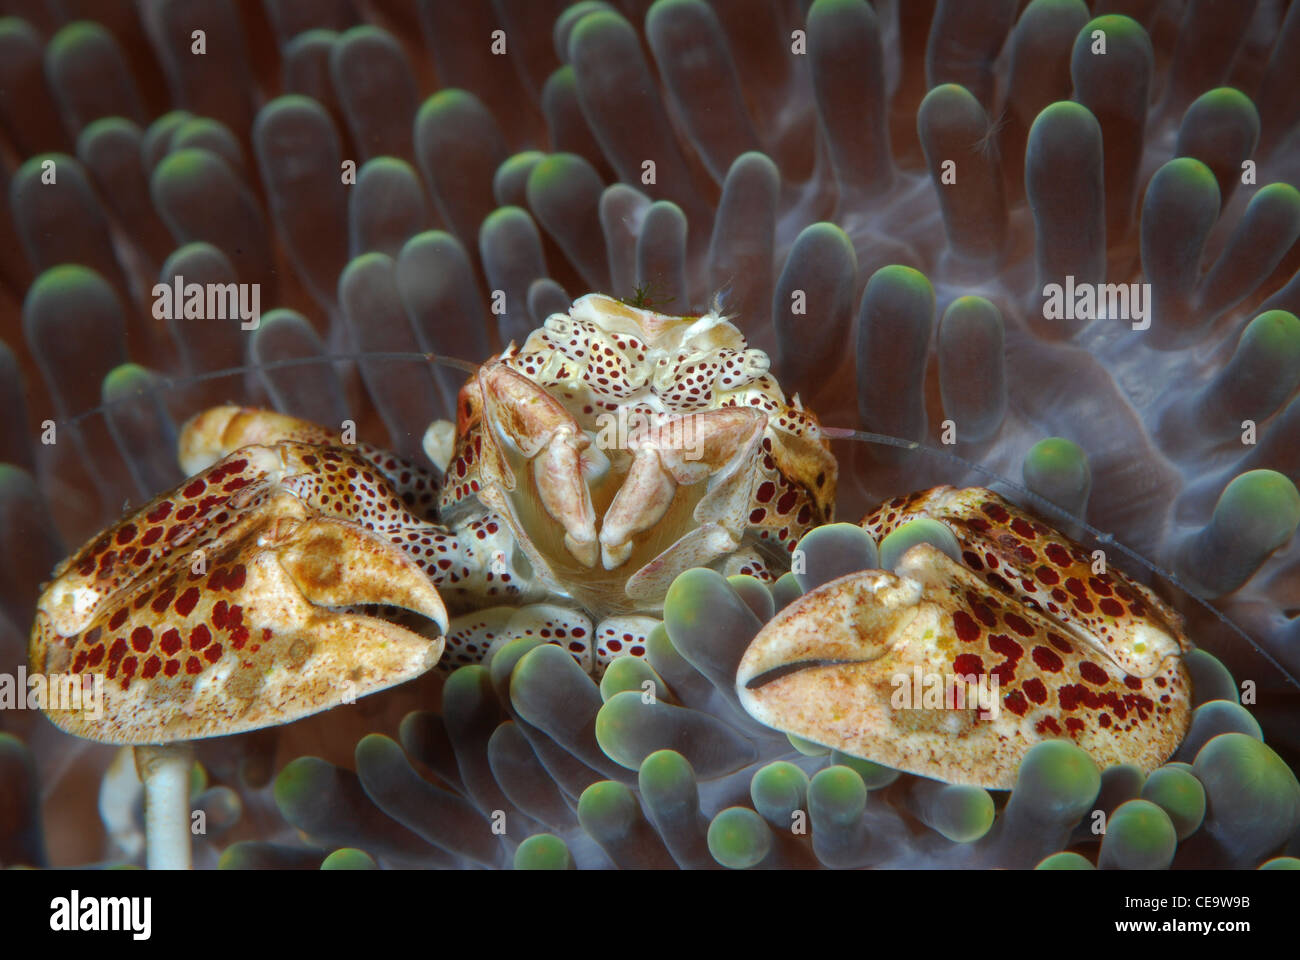 A spotted Porcelain Carb in its Anemone from Bunaken Island, Bunaken Marine Park Indonesia Stock Photo